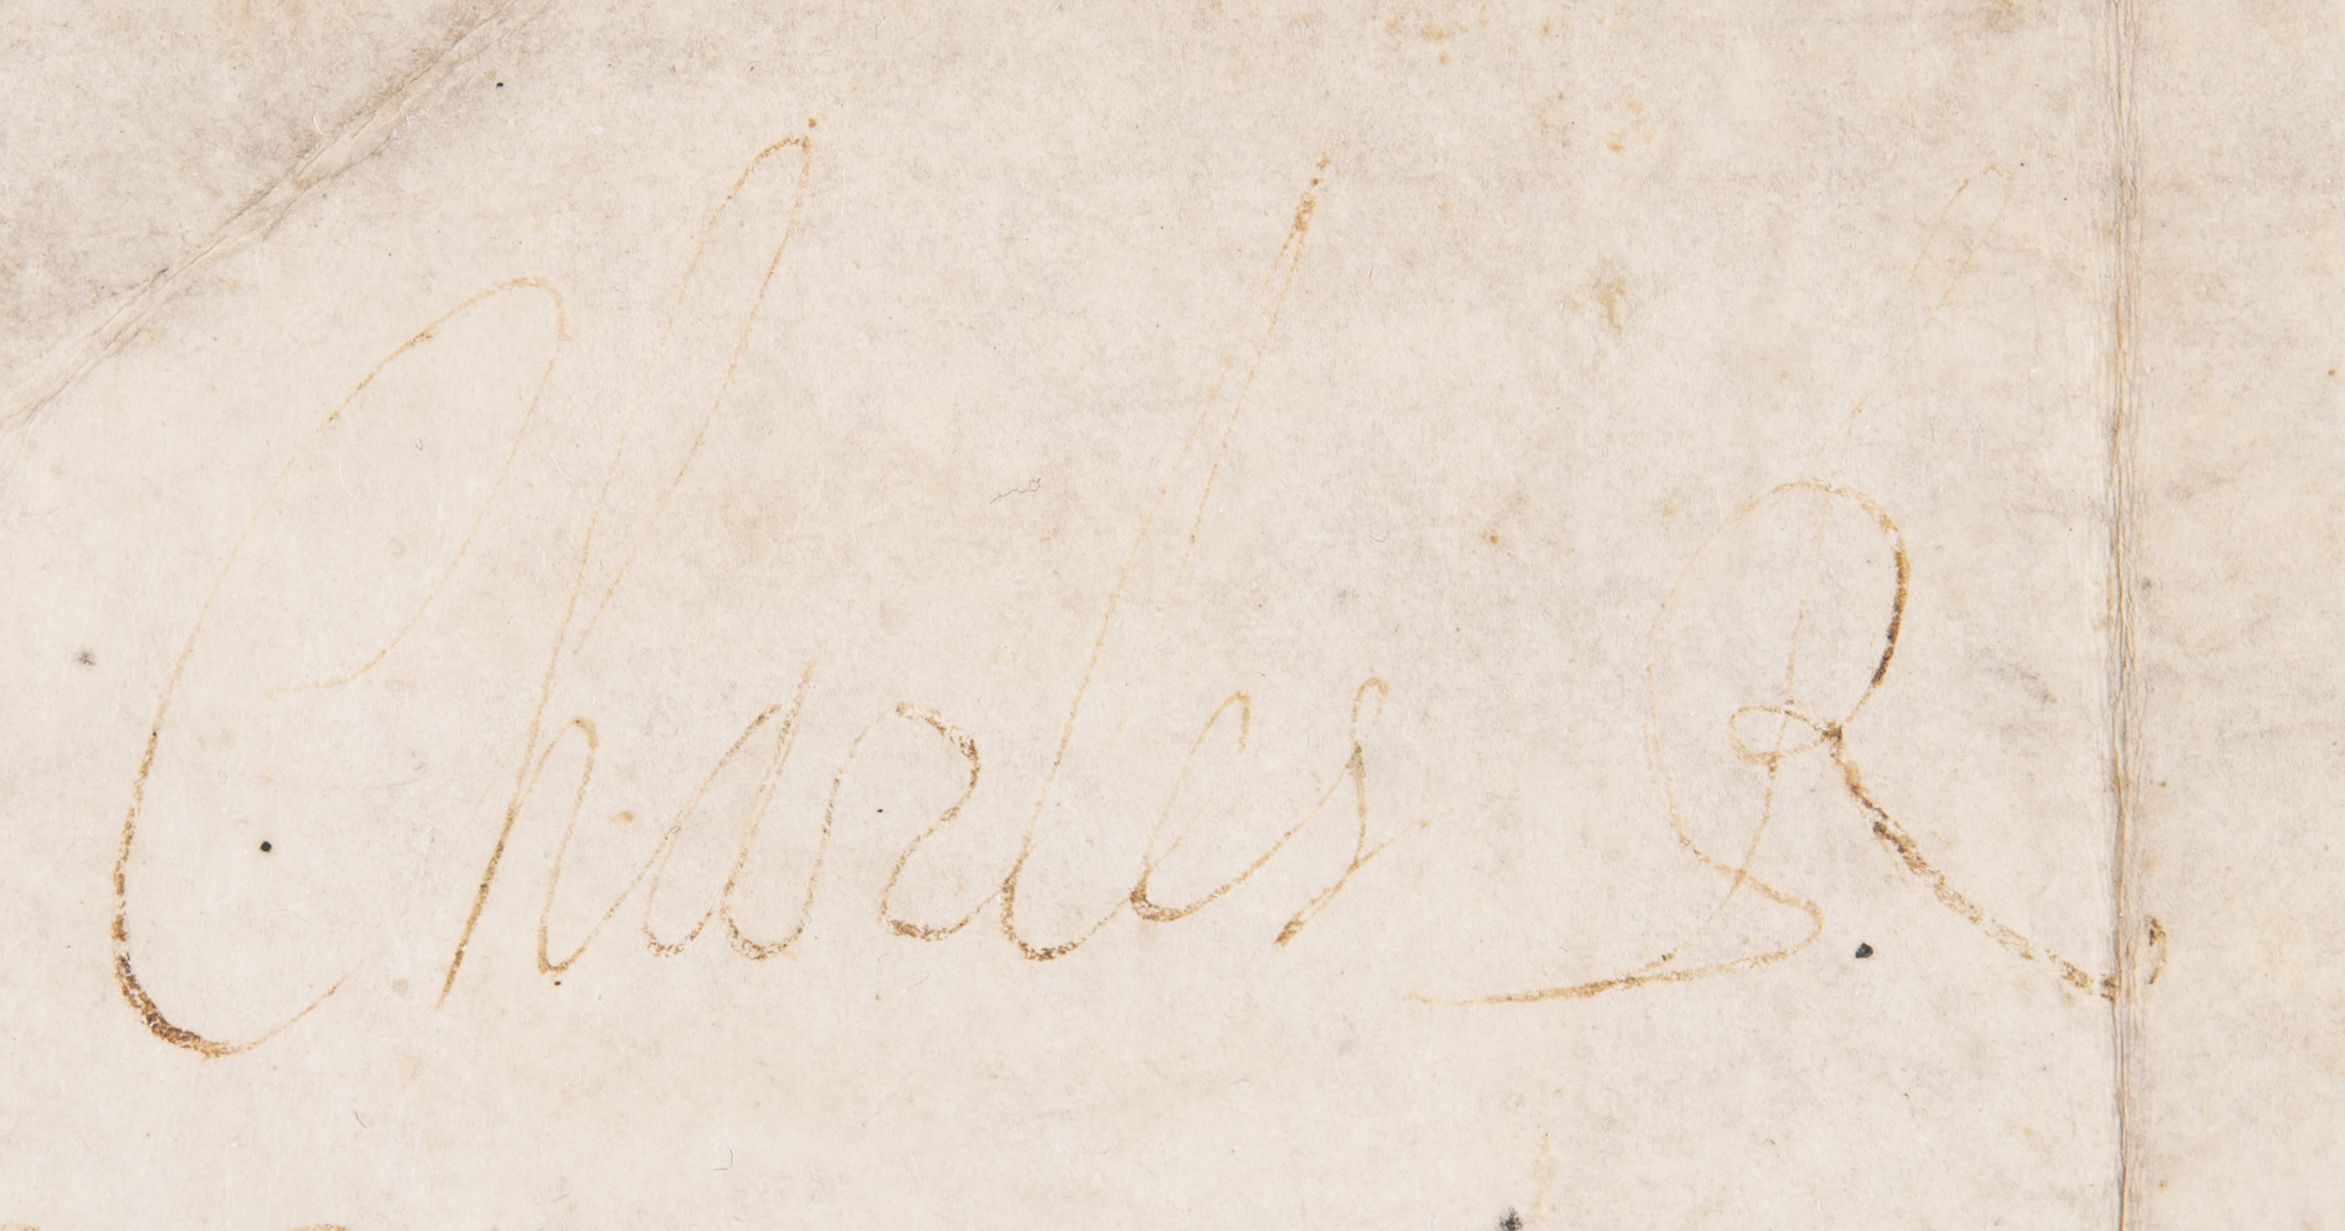 Lot #67 King Charles I Signed 1625 Document - approving officer livery for the arrival of the future queen - Image 3